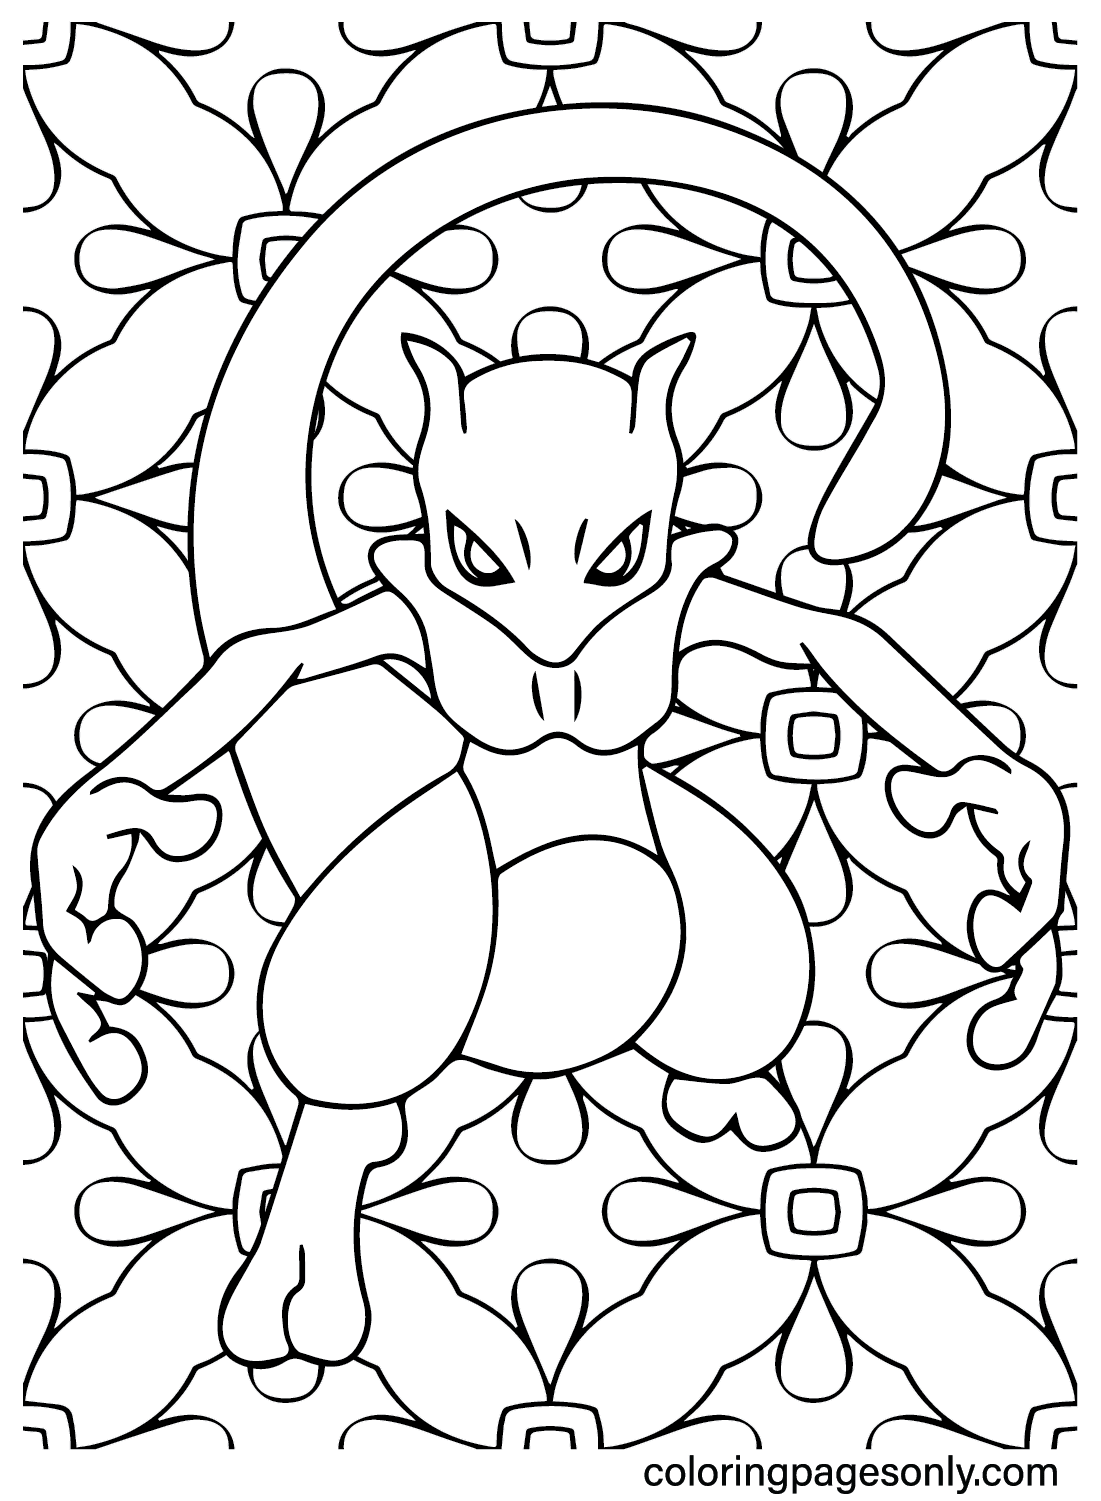 Images Mewtwo Coloring Page from Mewtwo